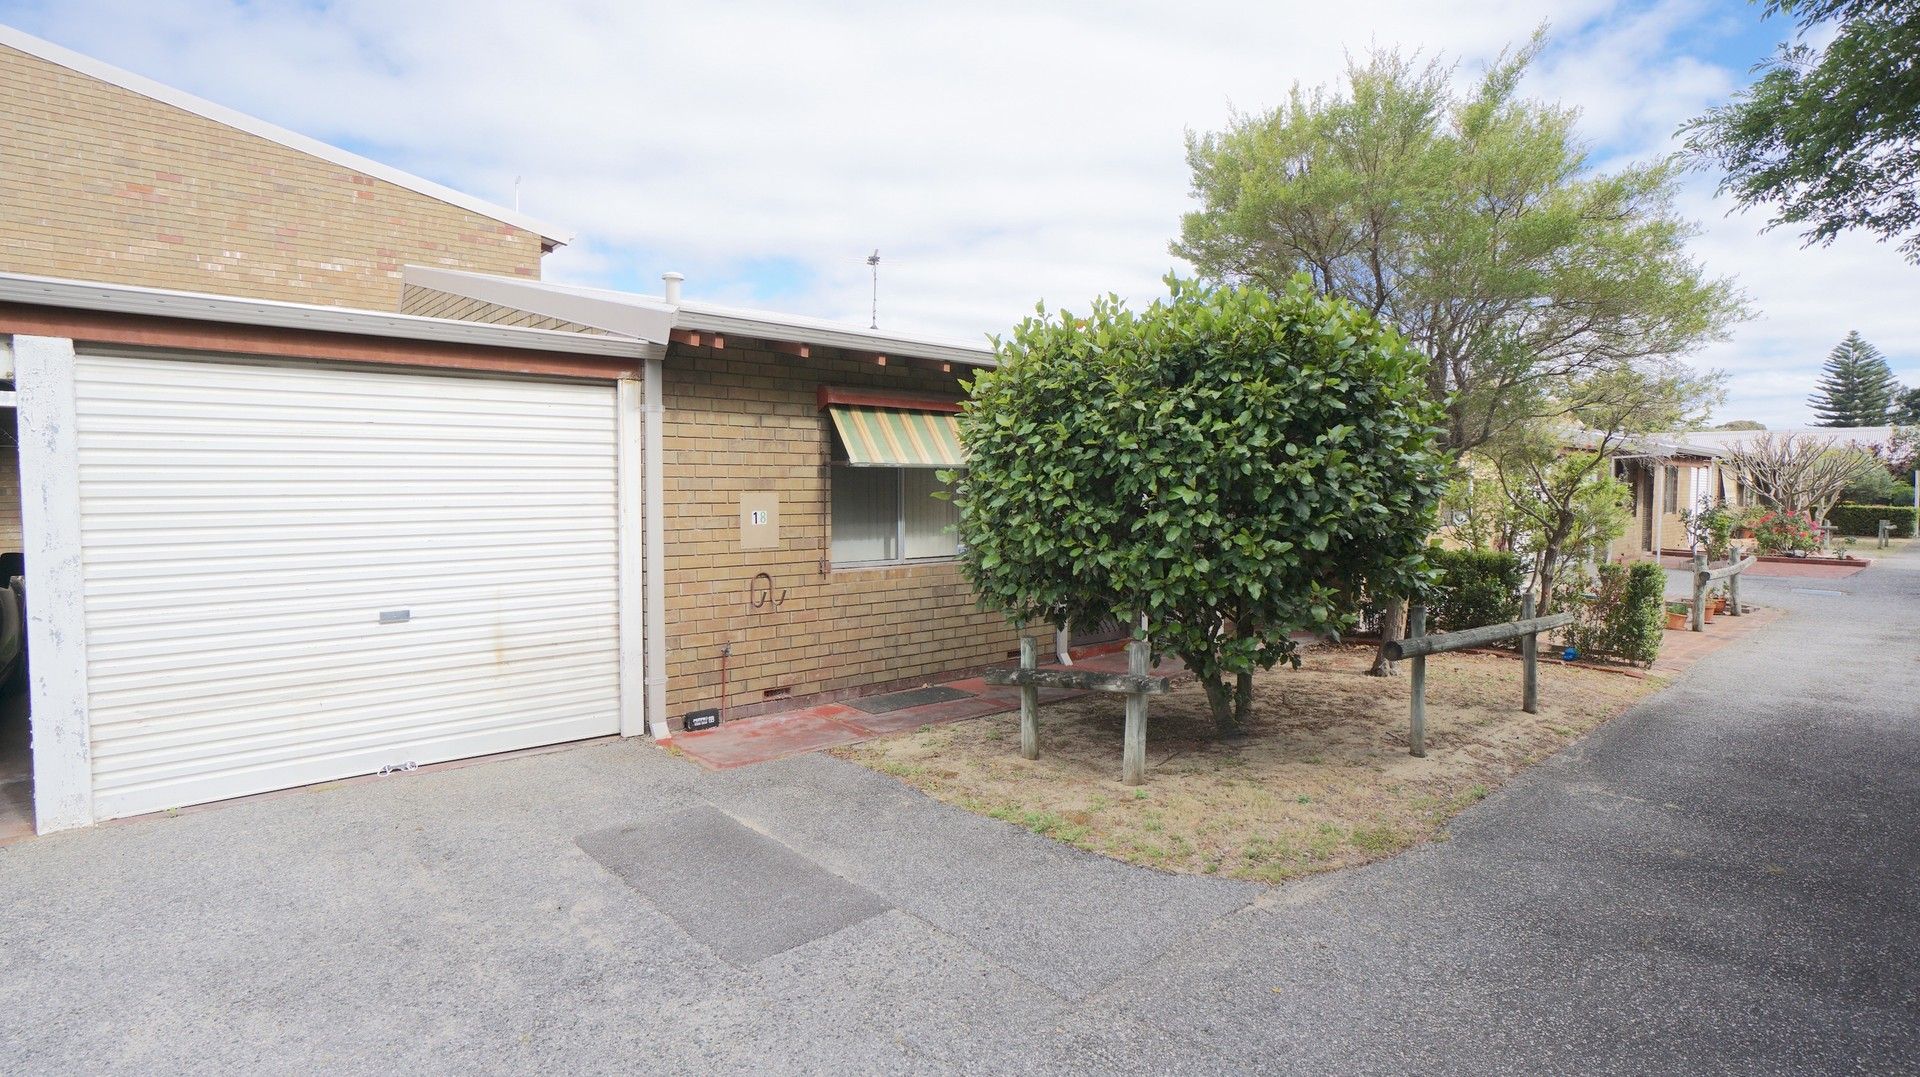 2 bedrooms House in 18/61 Shakespeare Ave YOKINE WA, 6060